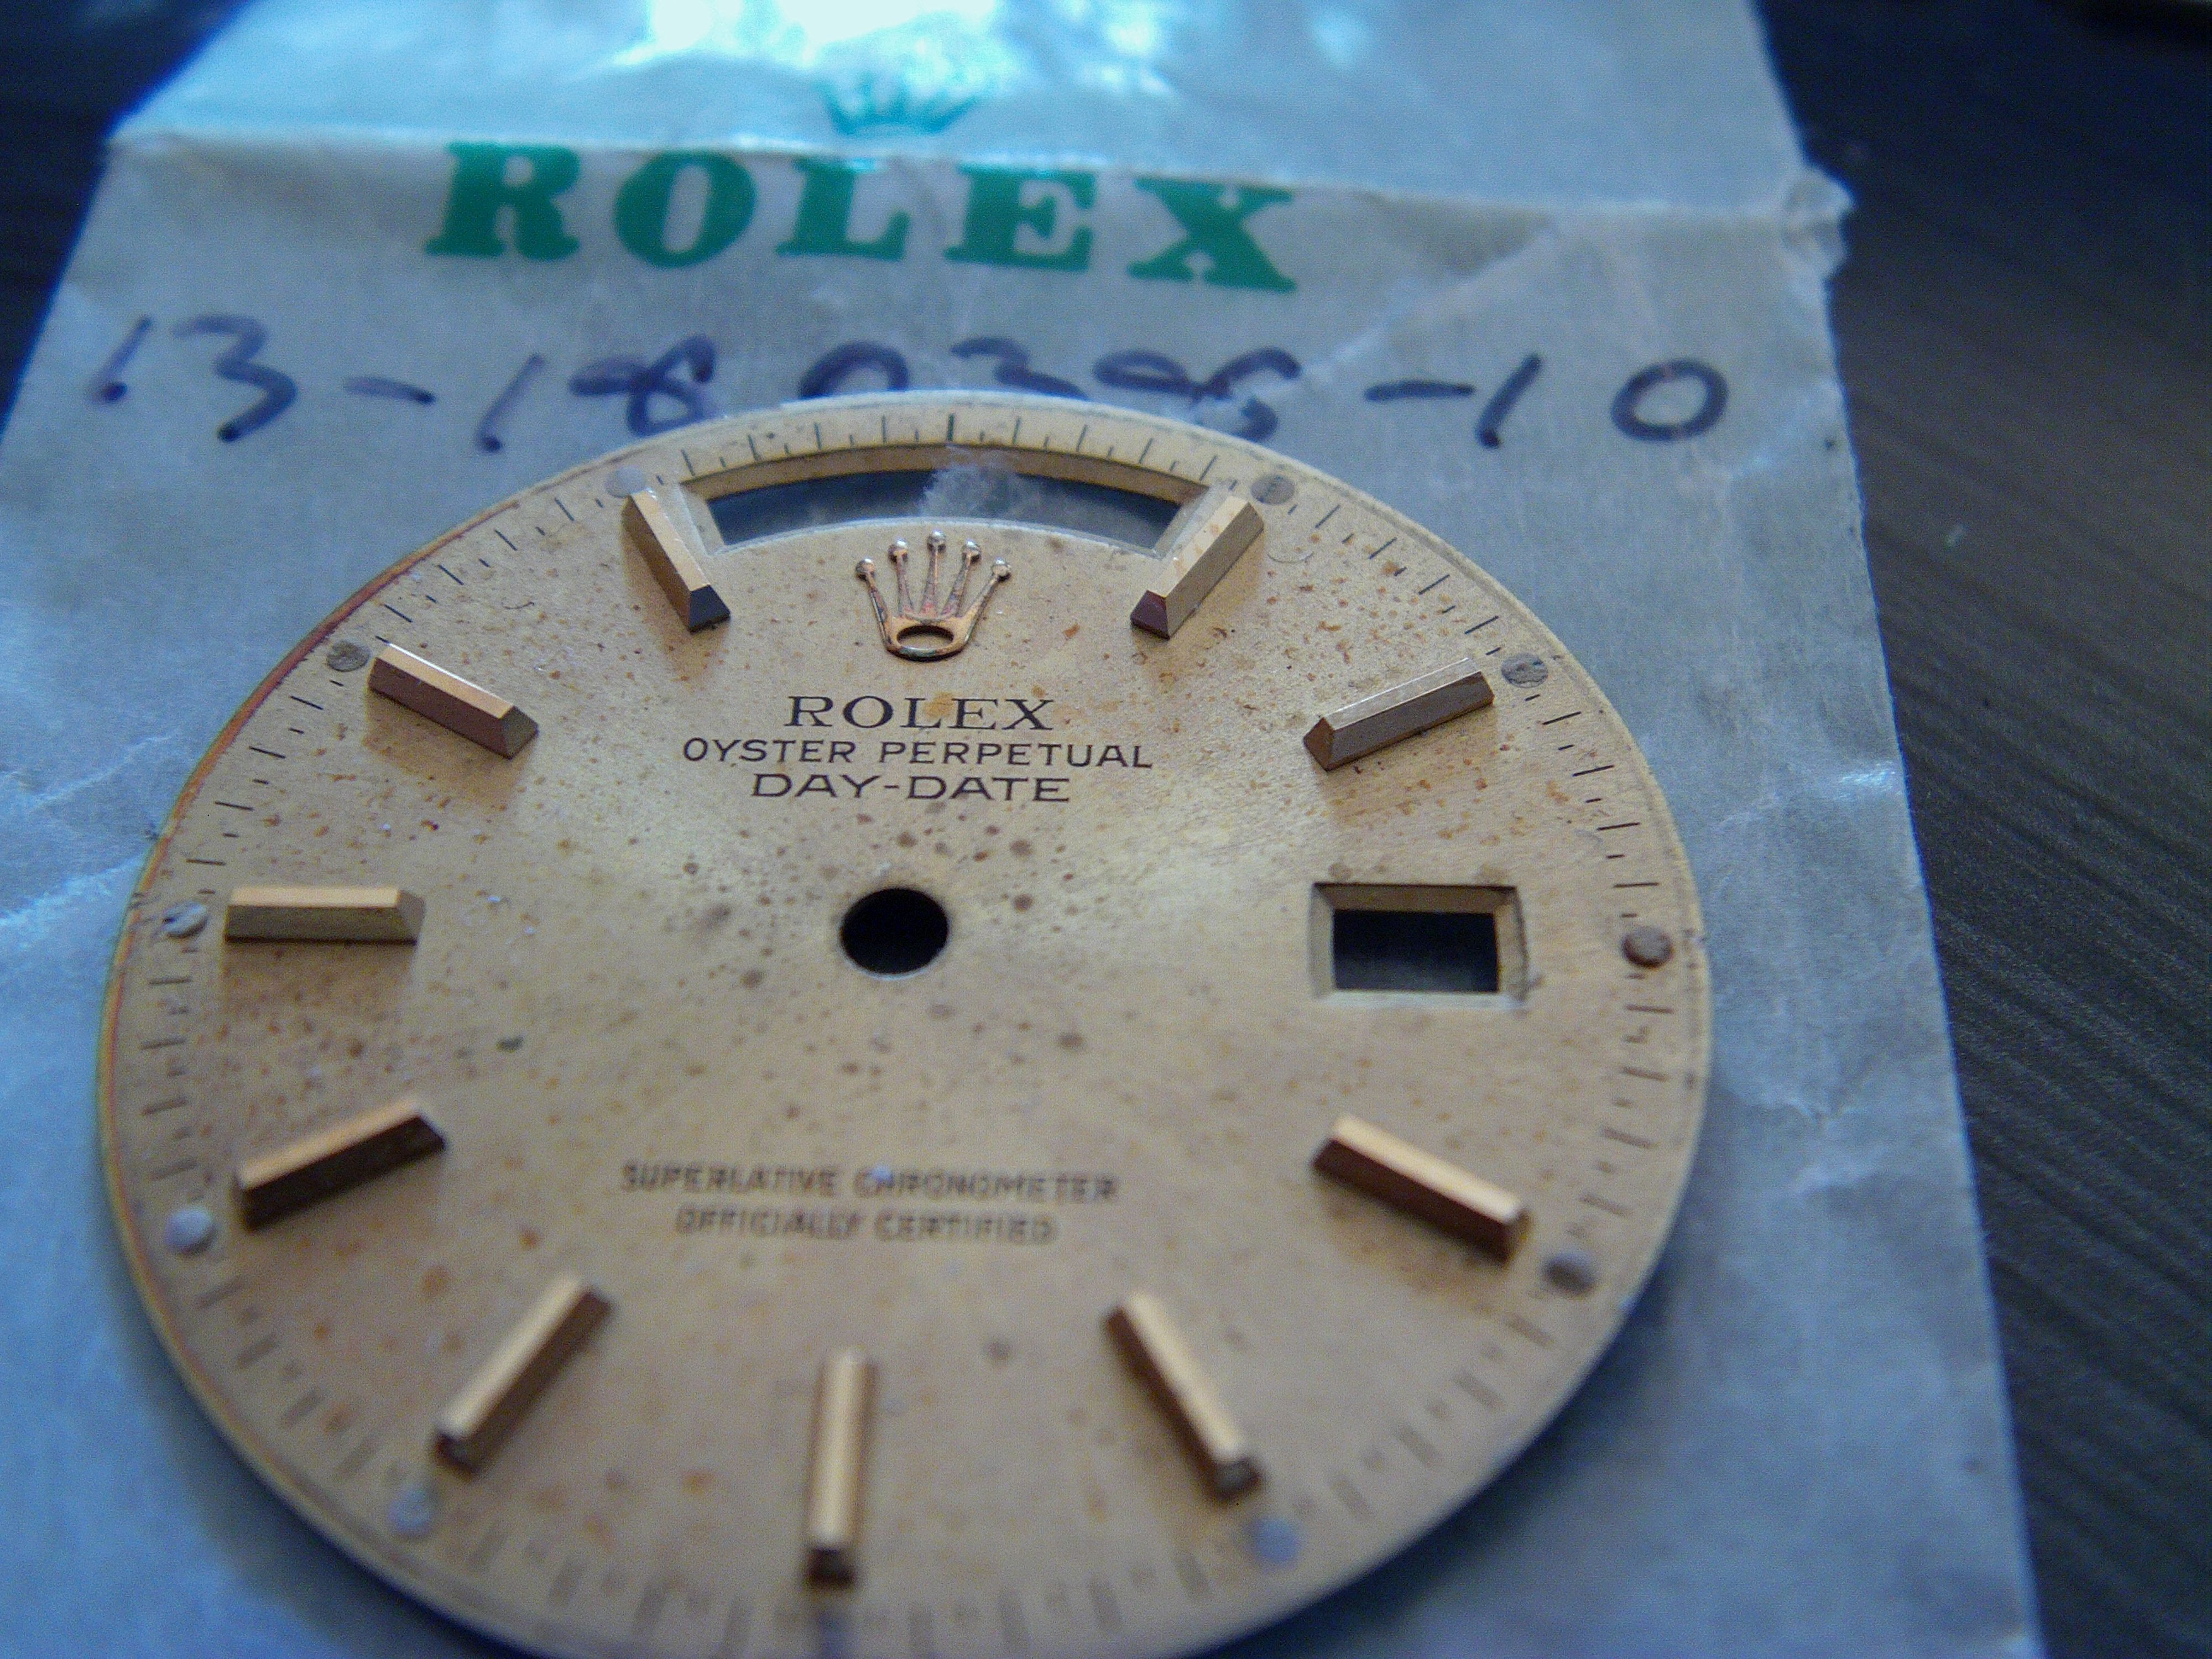 FS - Rolex Day-Date Dial | Omega Forums